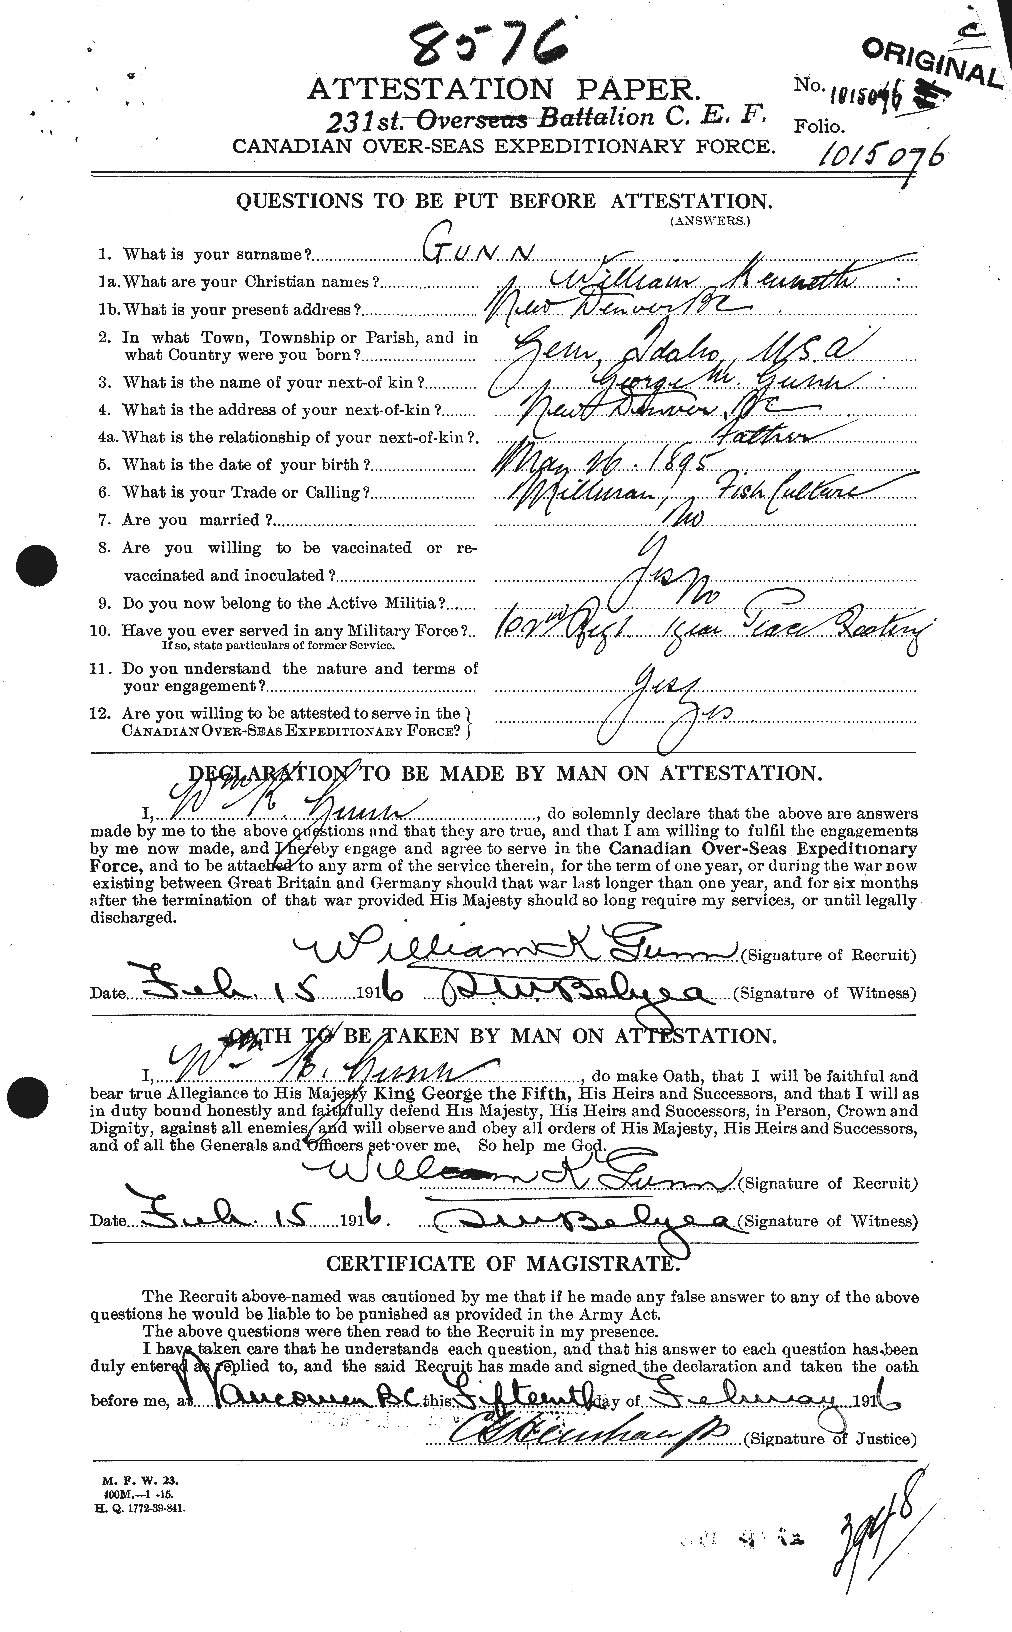 Personnel Records of the First World War - CEF 369372a